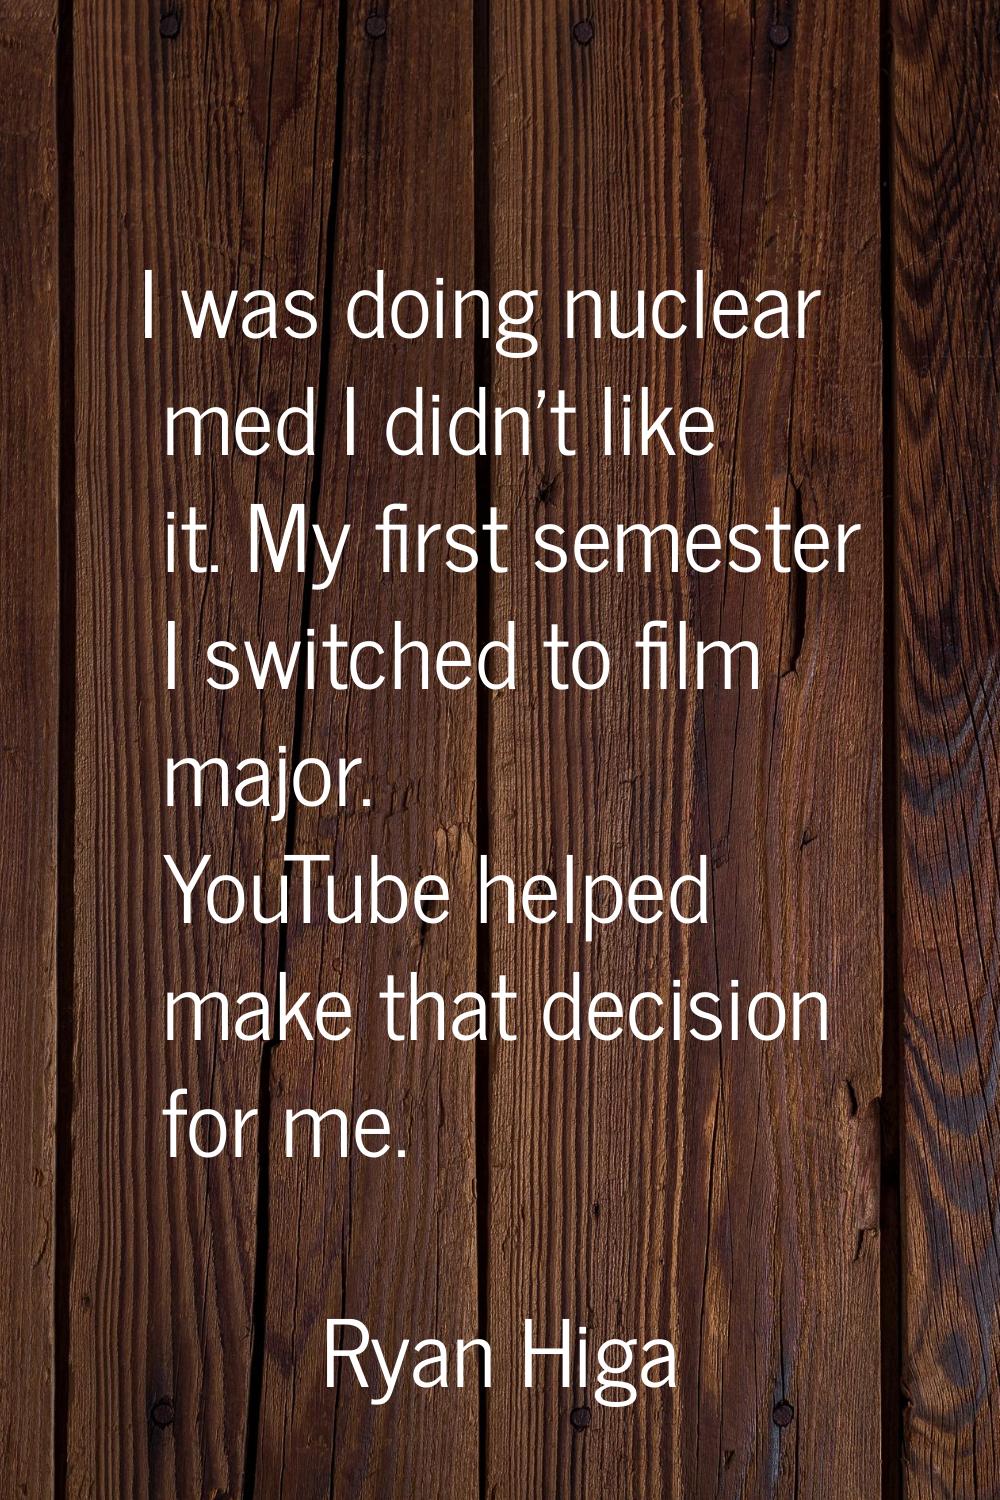 I was doing nuclear med I didn't like it. My first semester I switched to film major. YouTube helpe